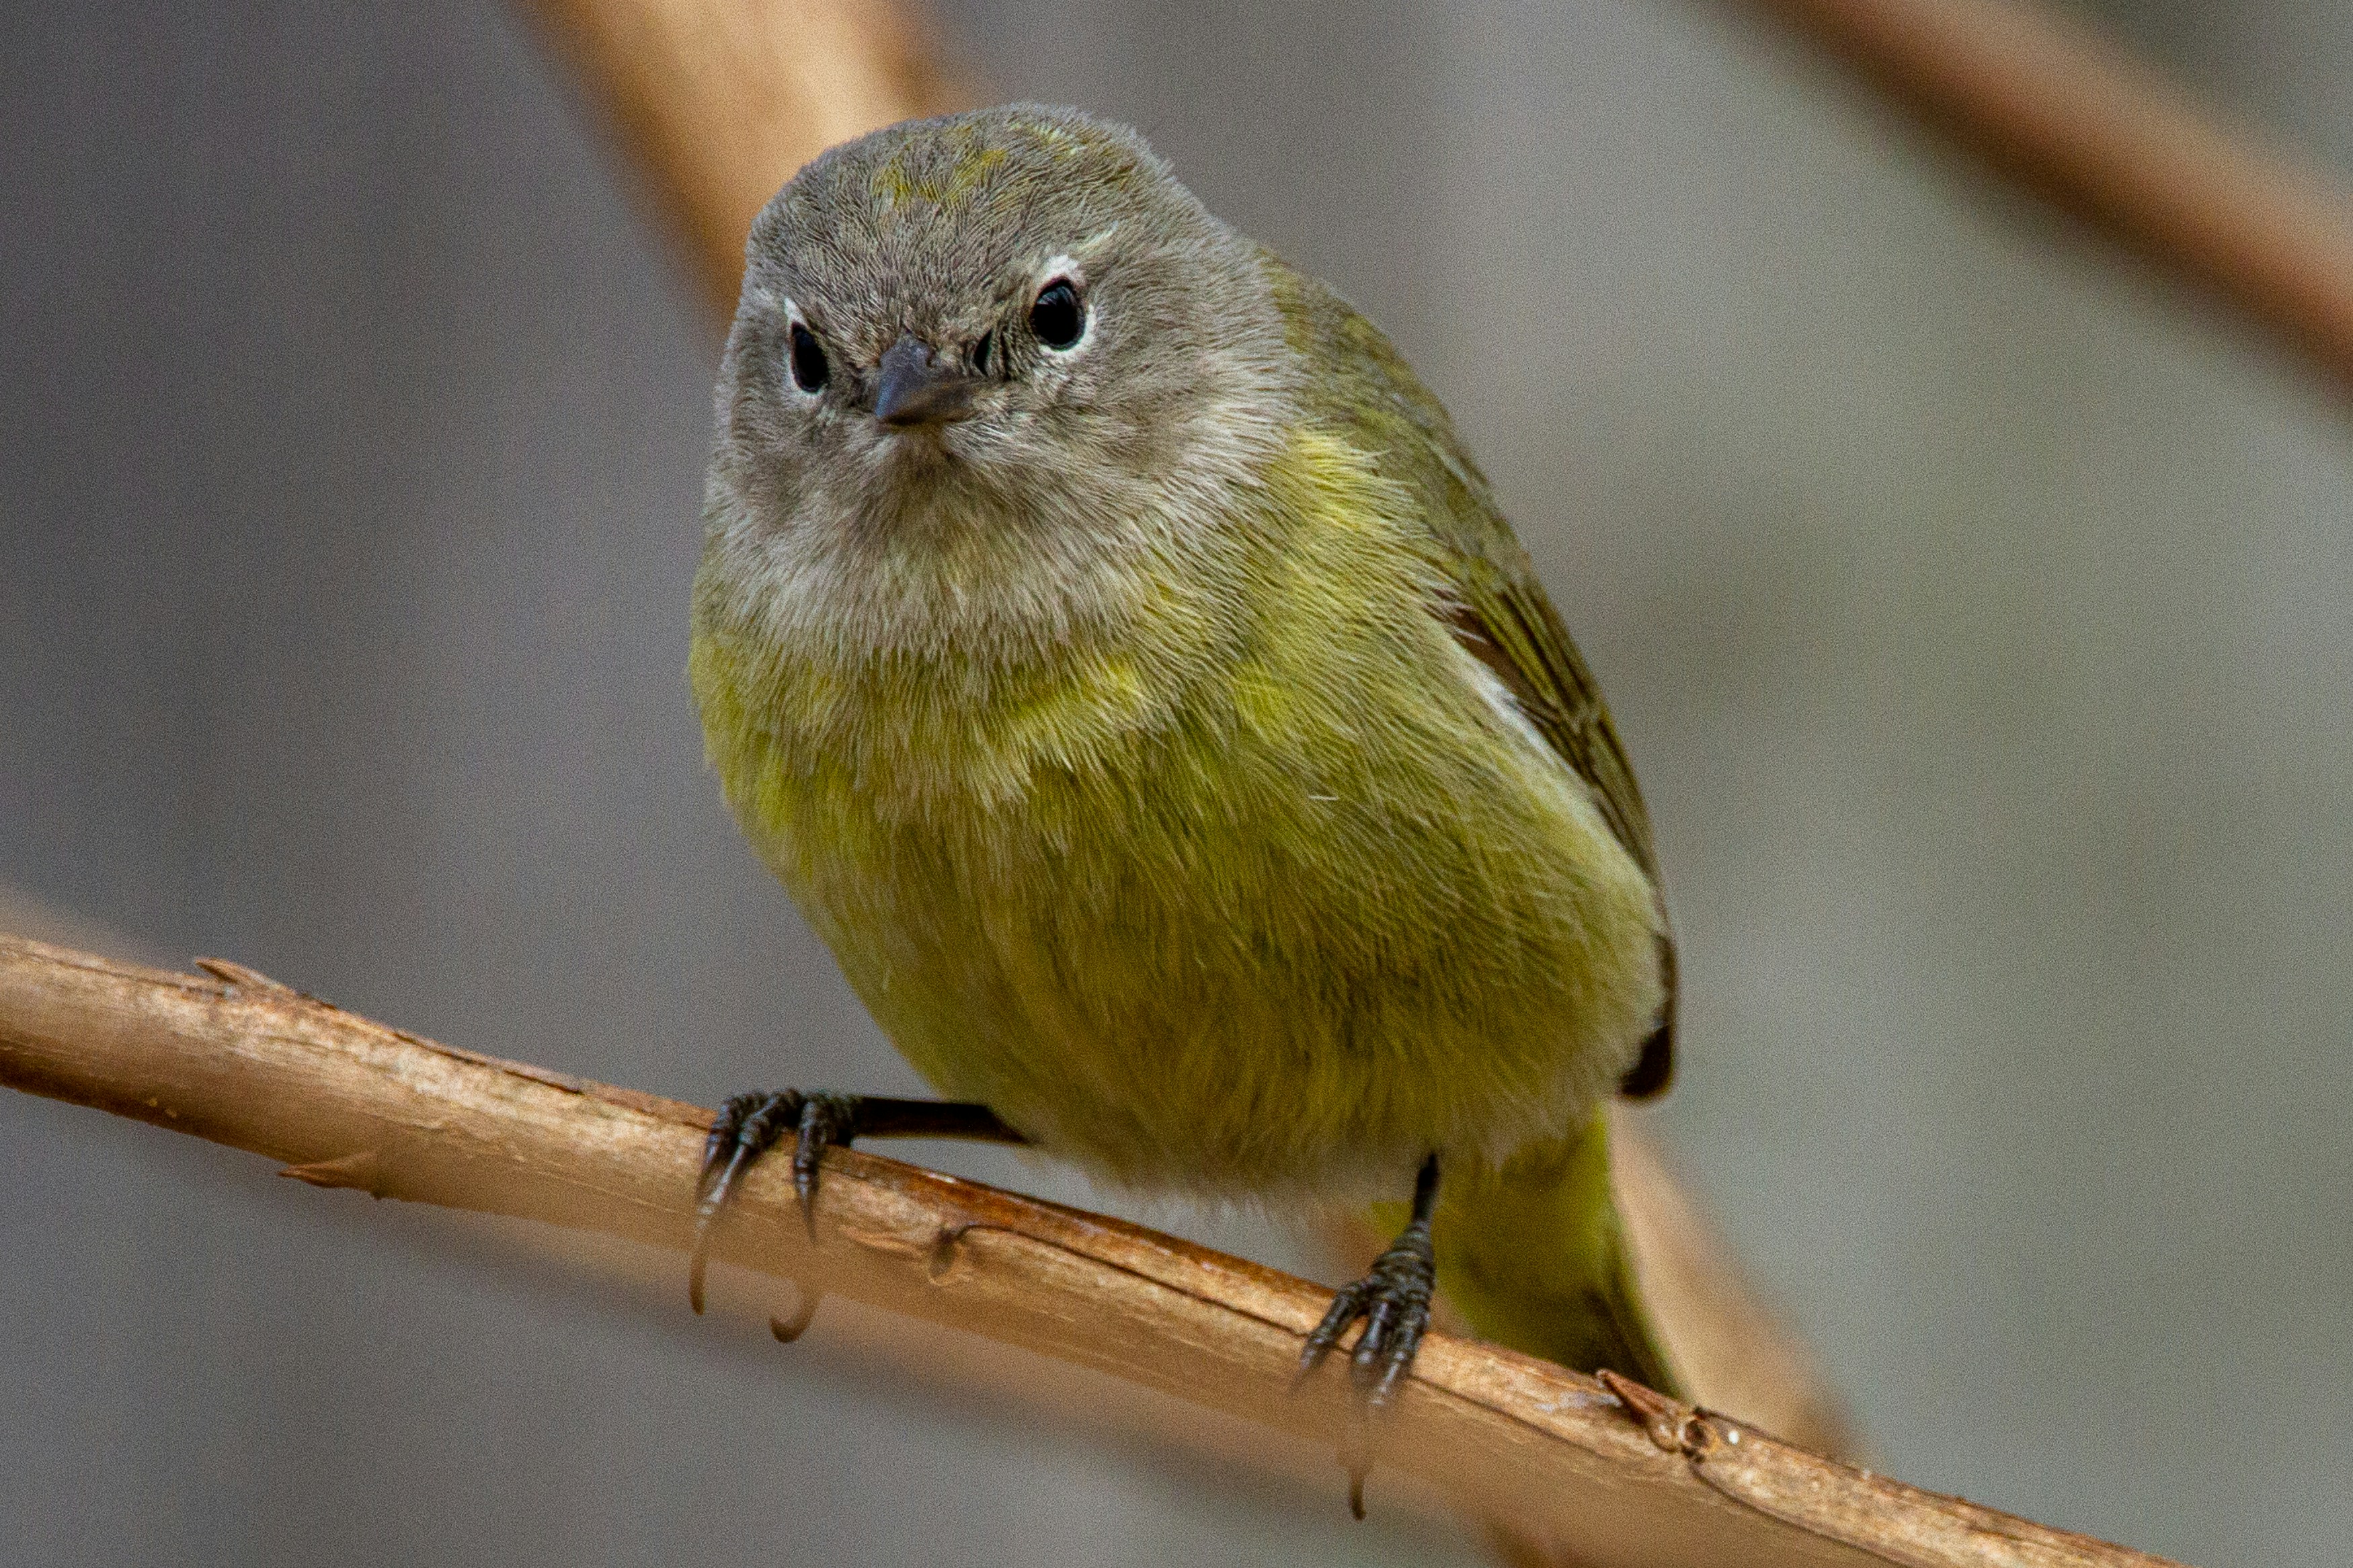 An orange-crowned warbler perched on a branch.